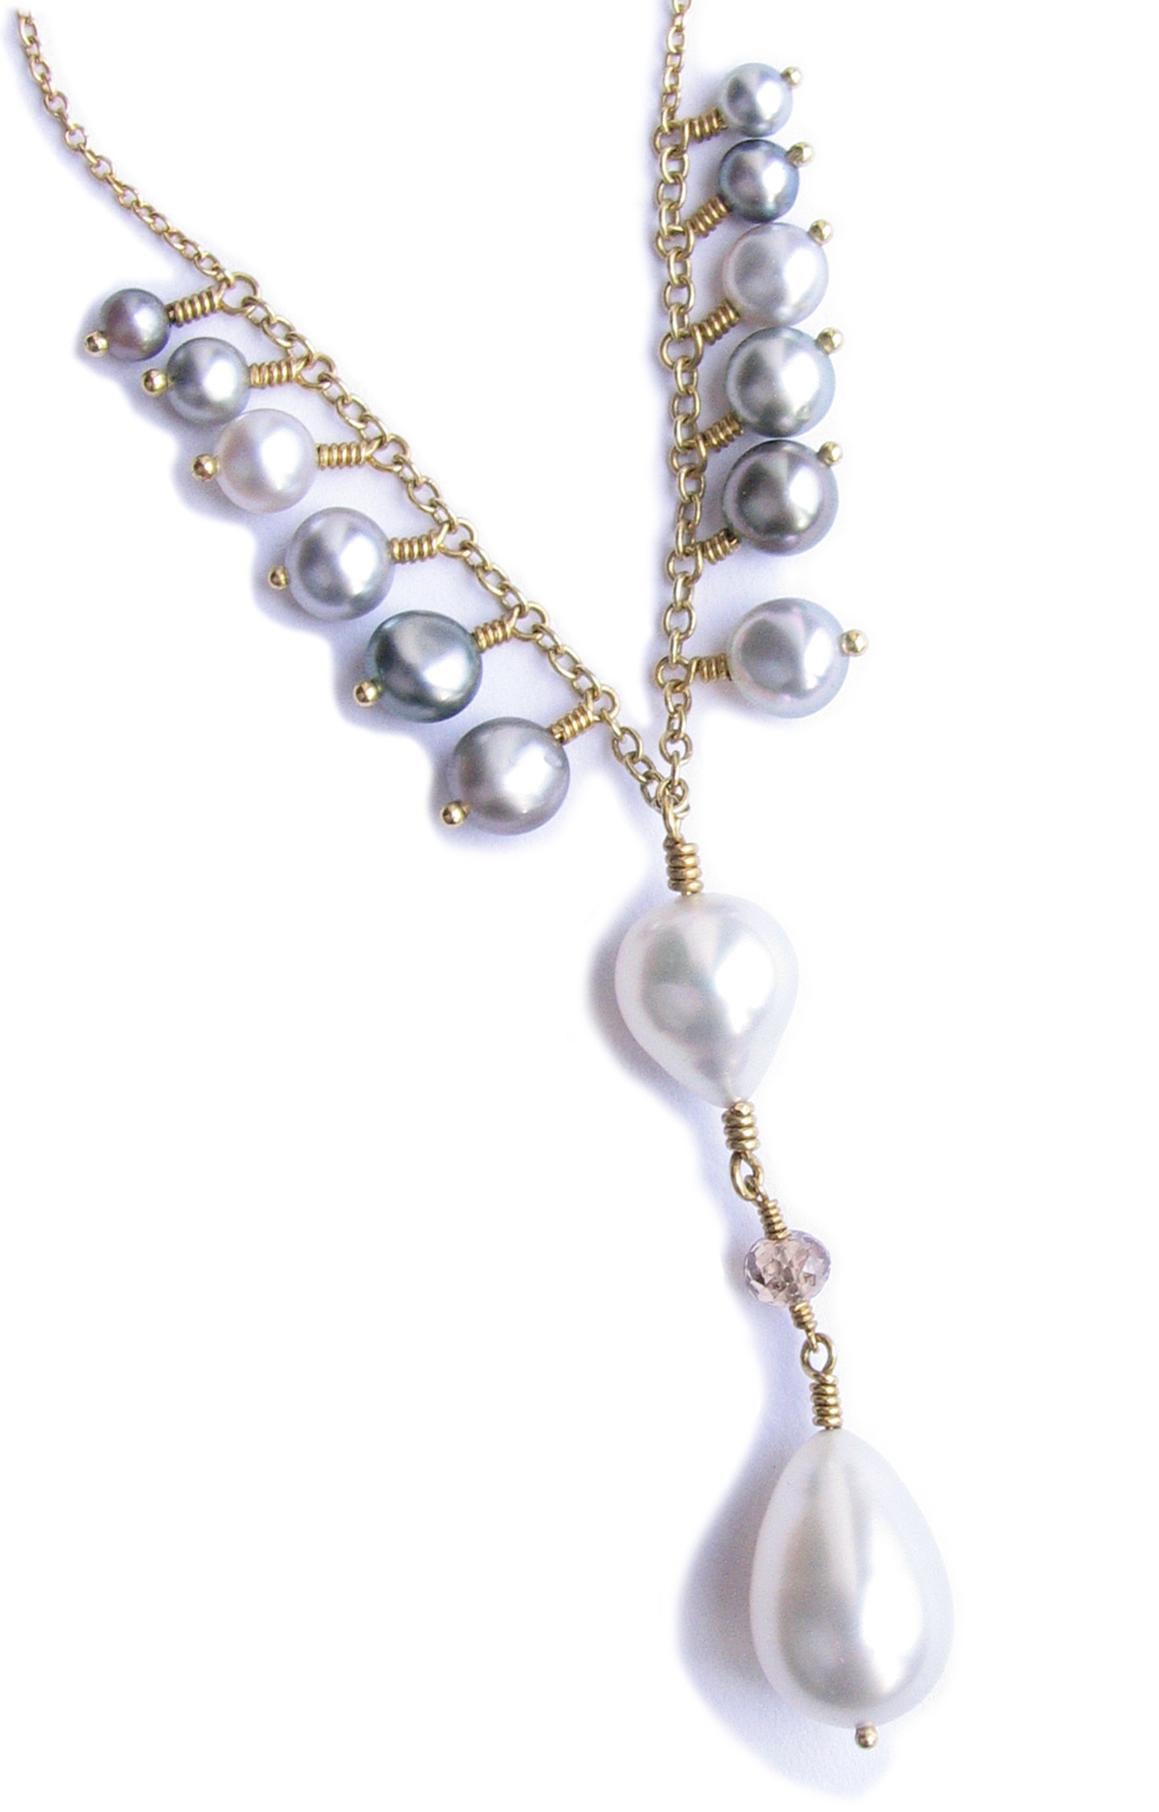 South sea keshi pearl and diamond necklace. One of a kind hand made in 18K gold. Length of necklace 17 inches.
Pearl quality and details: White south sea size 14 X 9 , 9 X 8 millimeter.
Accented with natural south sea keshi pearls 5 millimeter each.